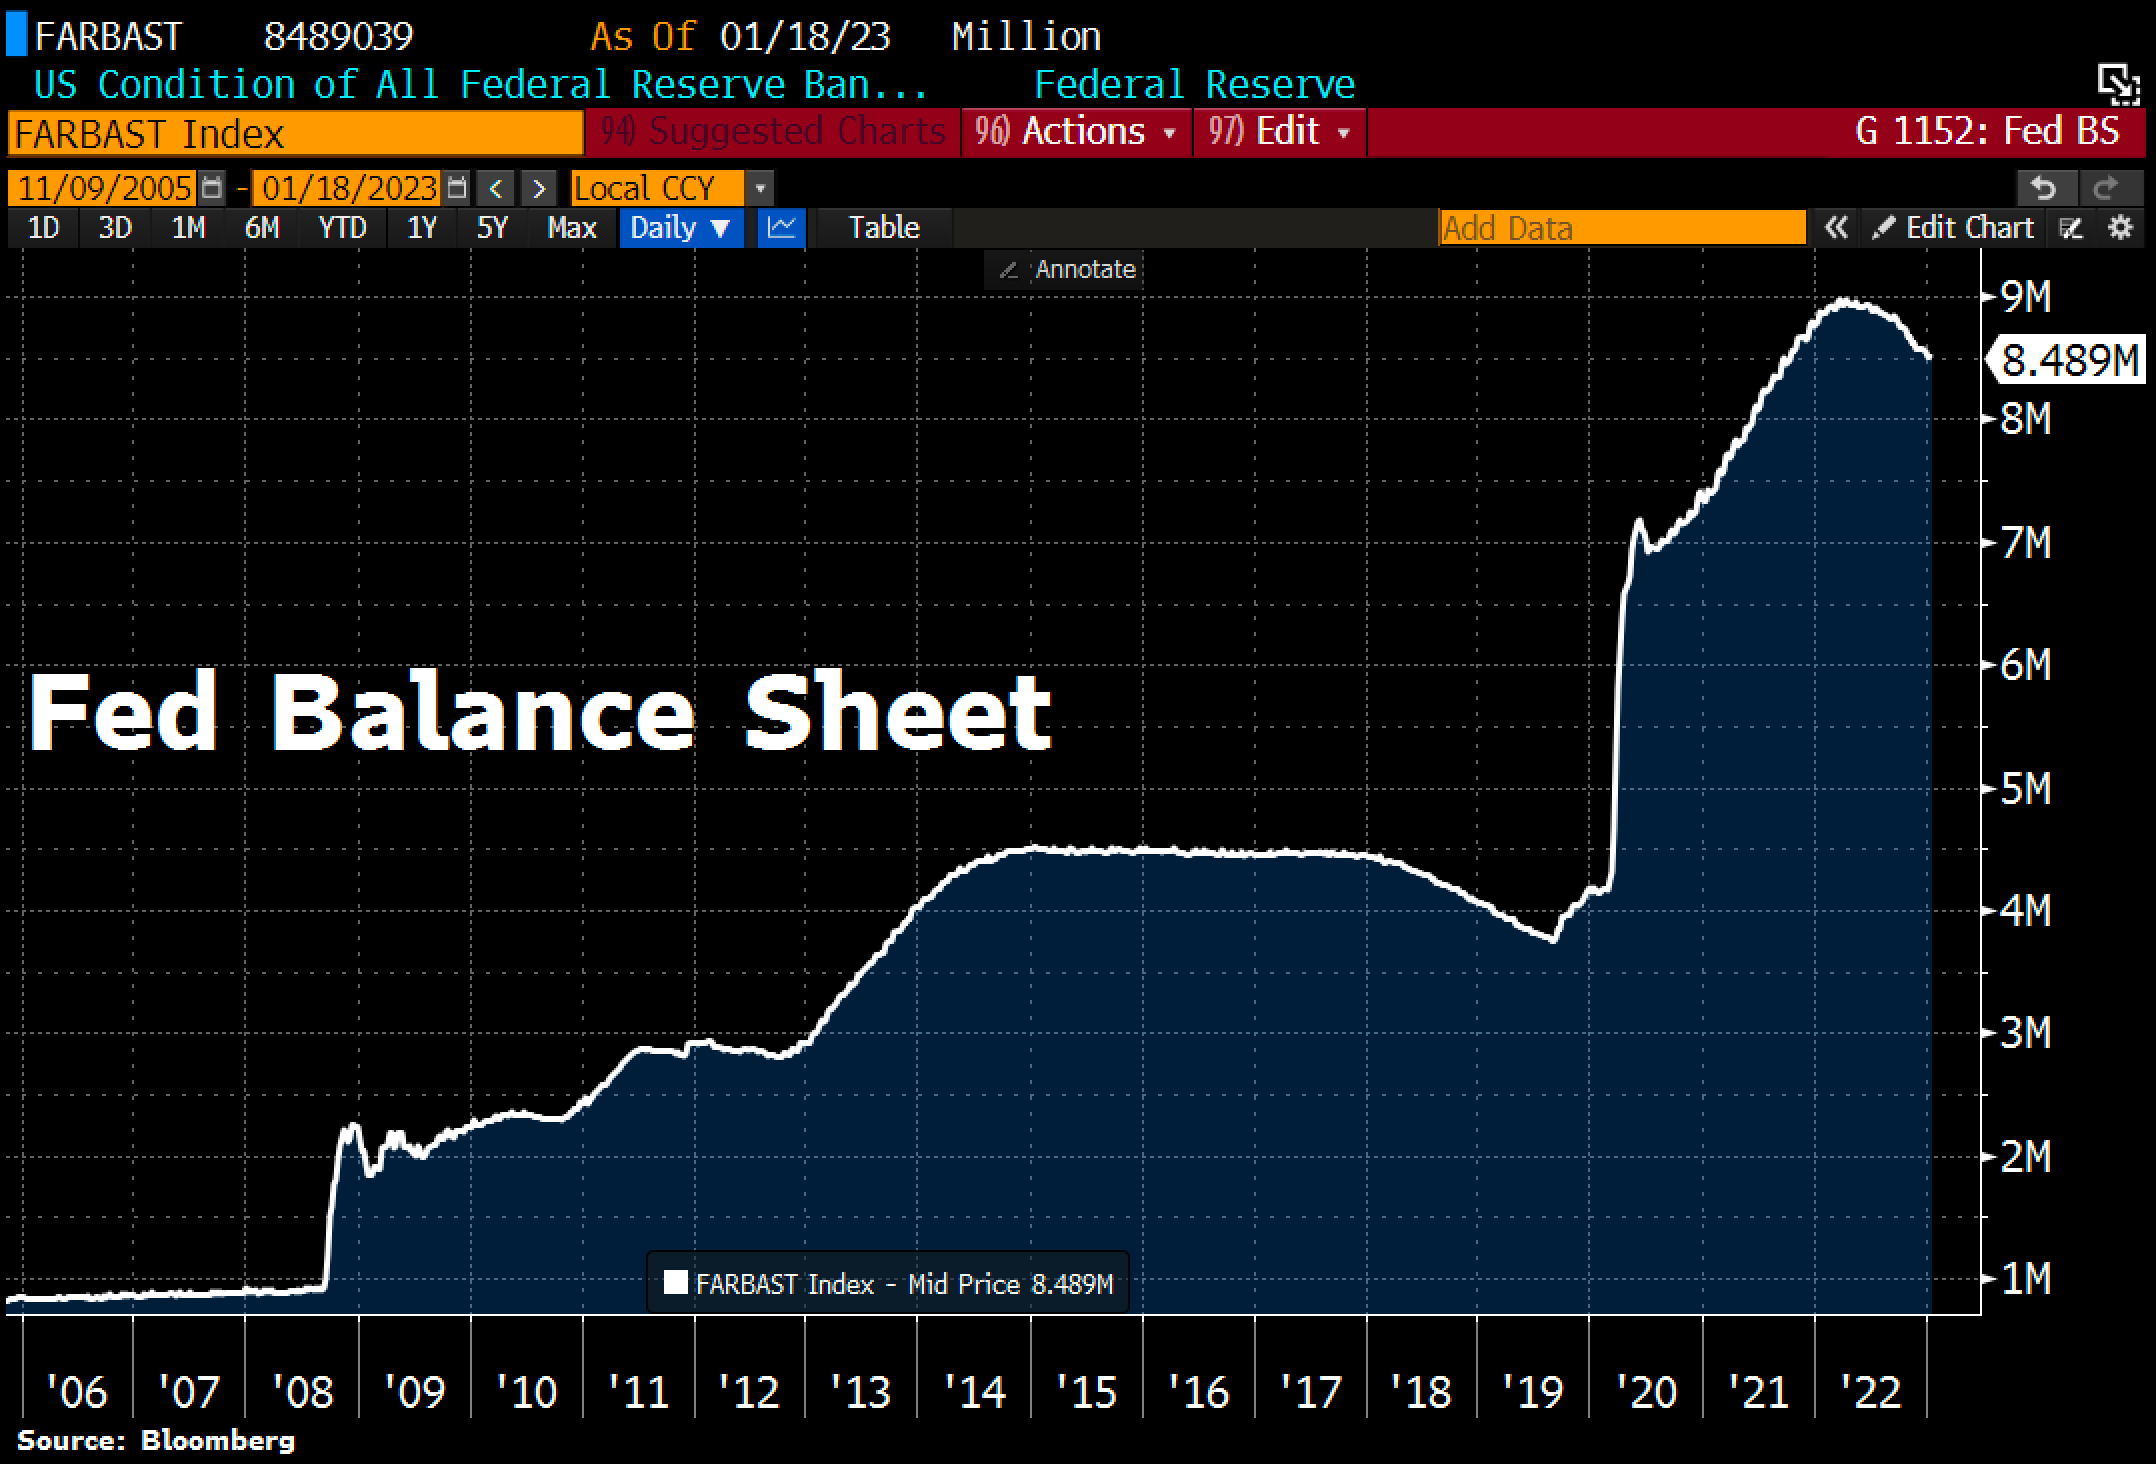 Fed's deleveraging continues